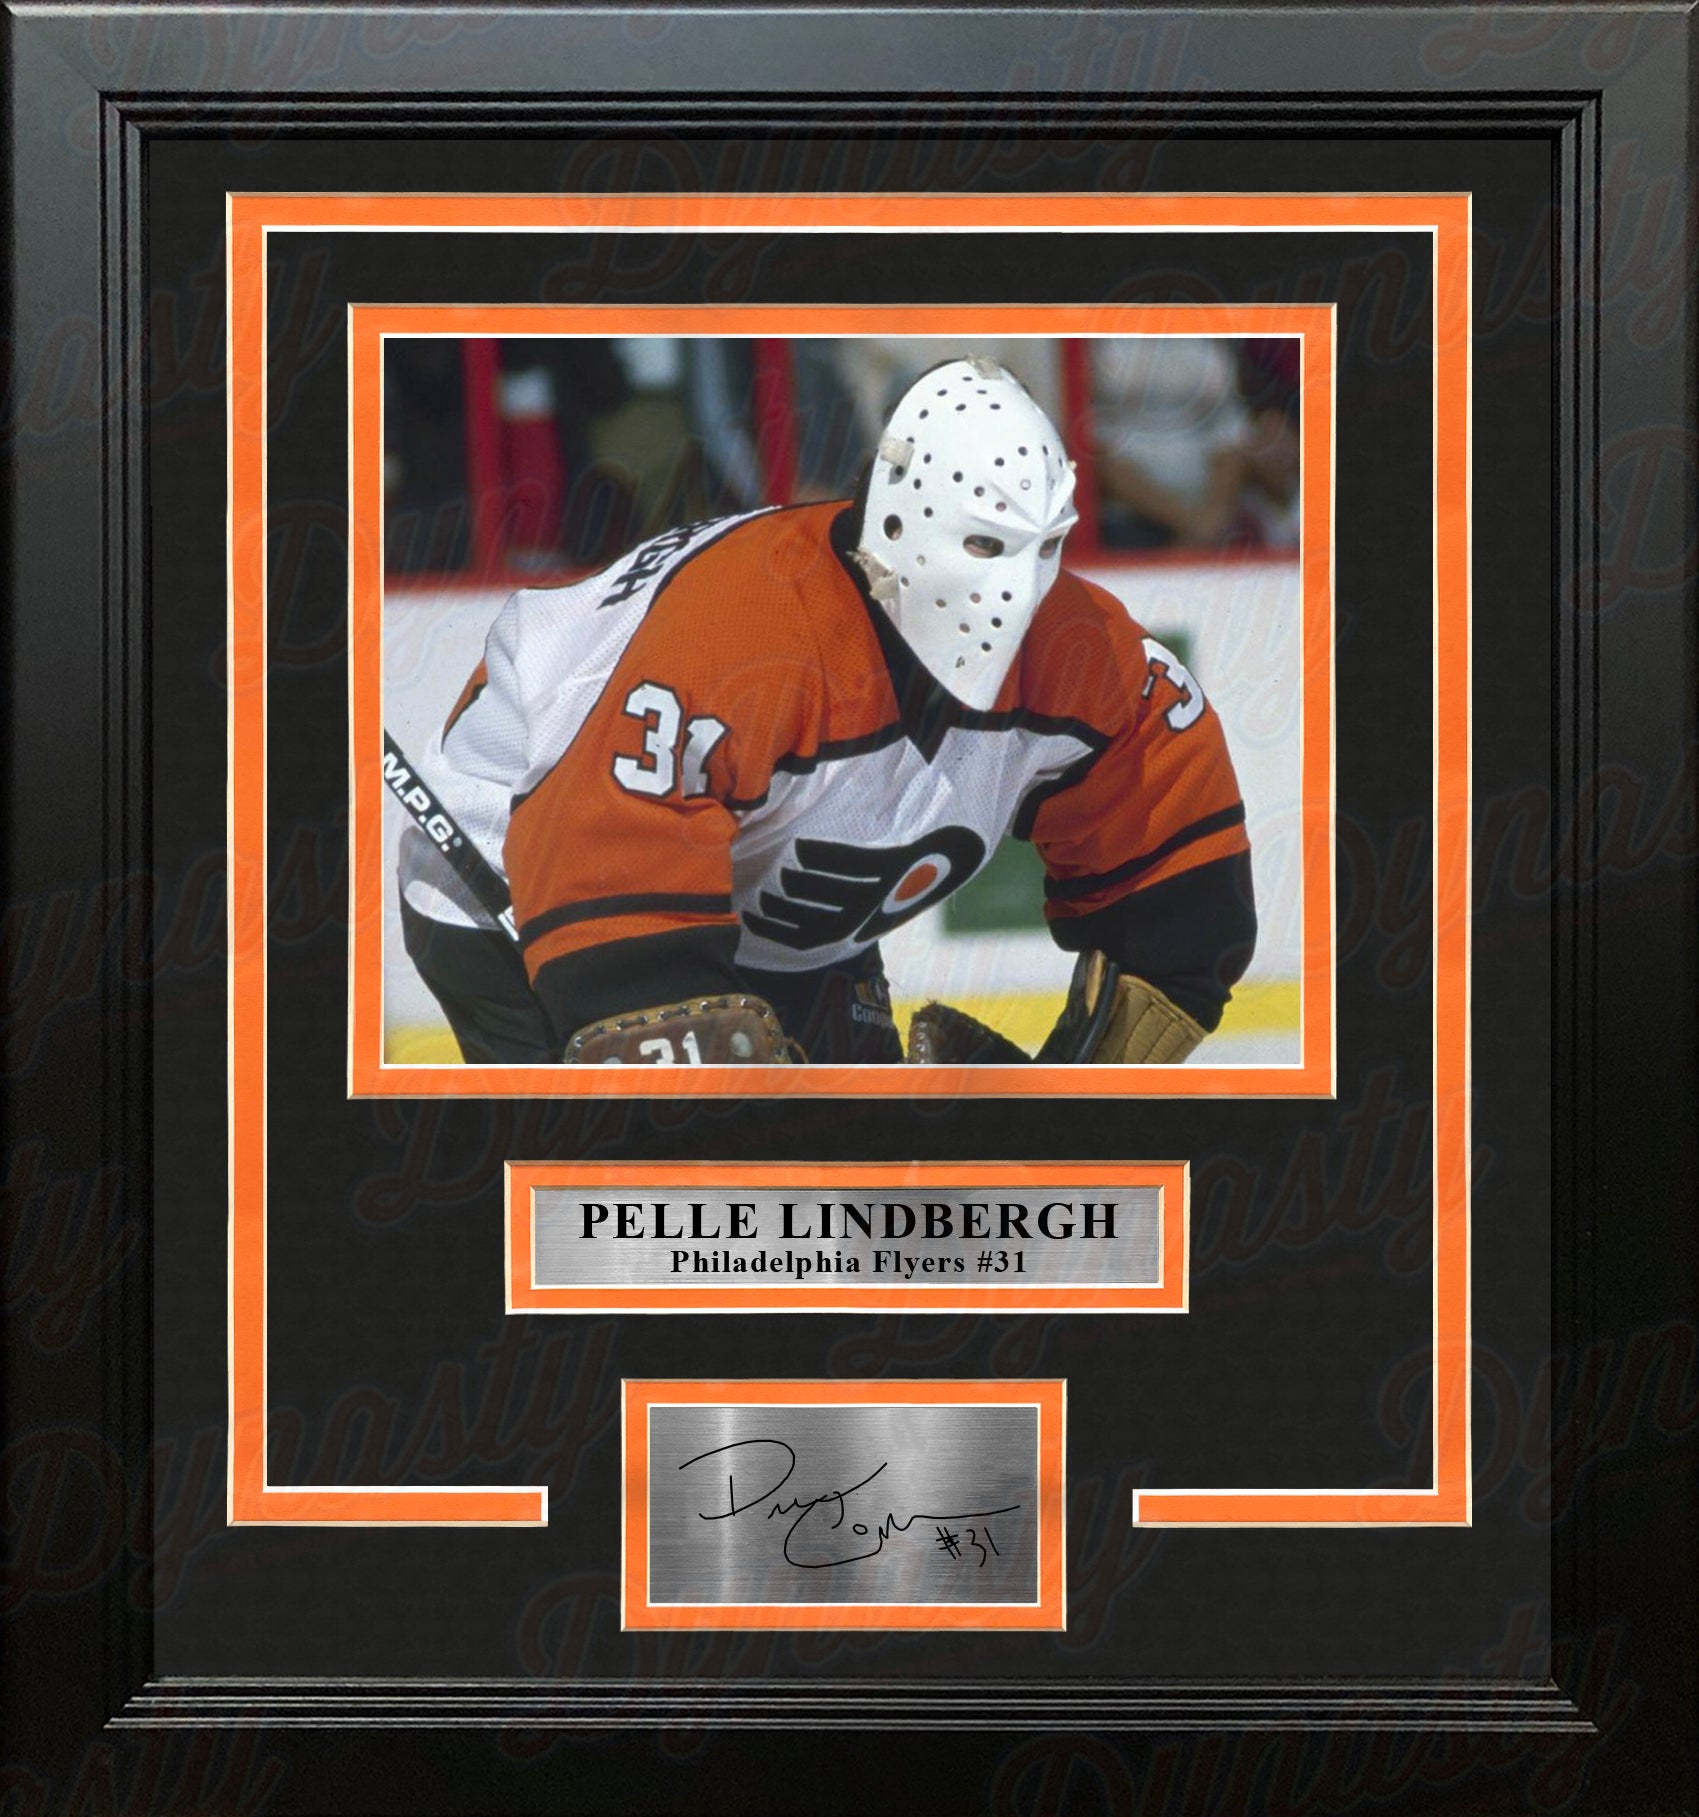 Pelle Lindbergh in Action Philadelphia Flyers Framed Hockey Photo with Engraved Autograph - Dynasty Sports & Framing 